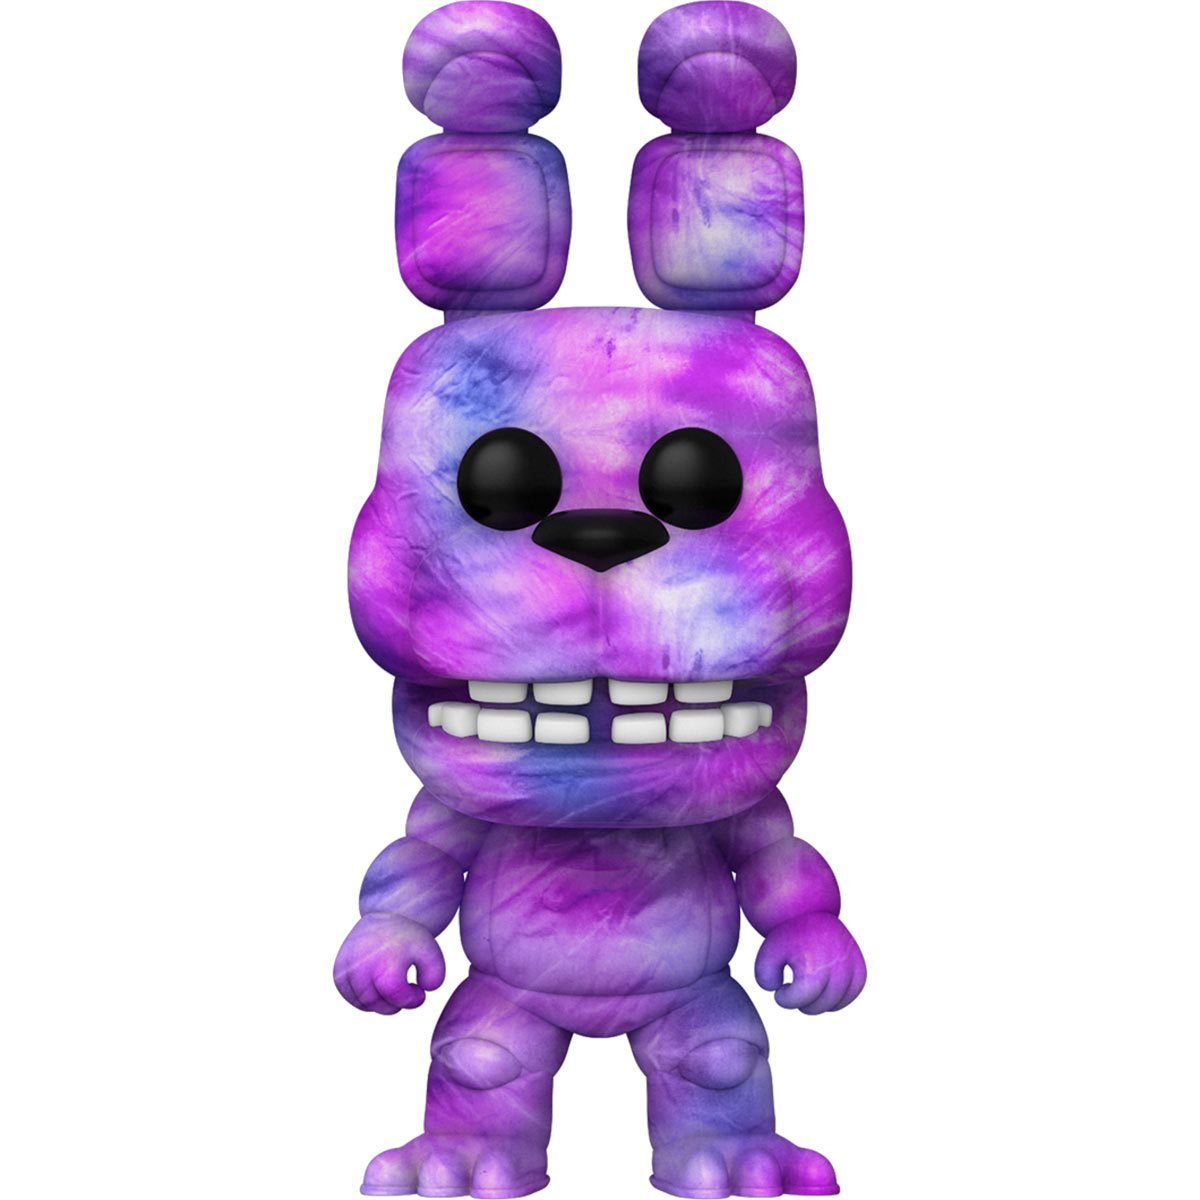 Funko Pop! Five Nights at Freddy's™ tie dye chica action figure